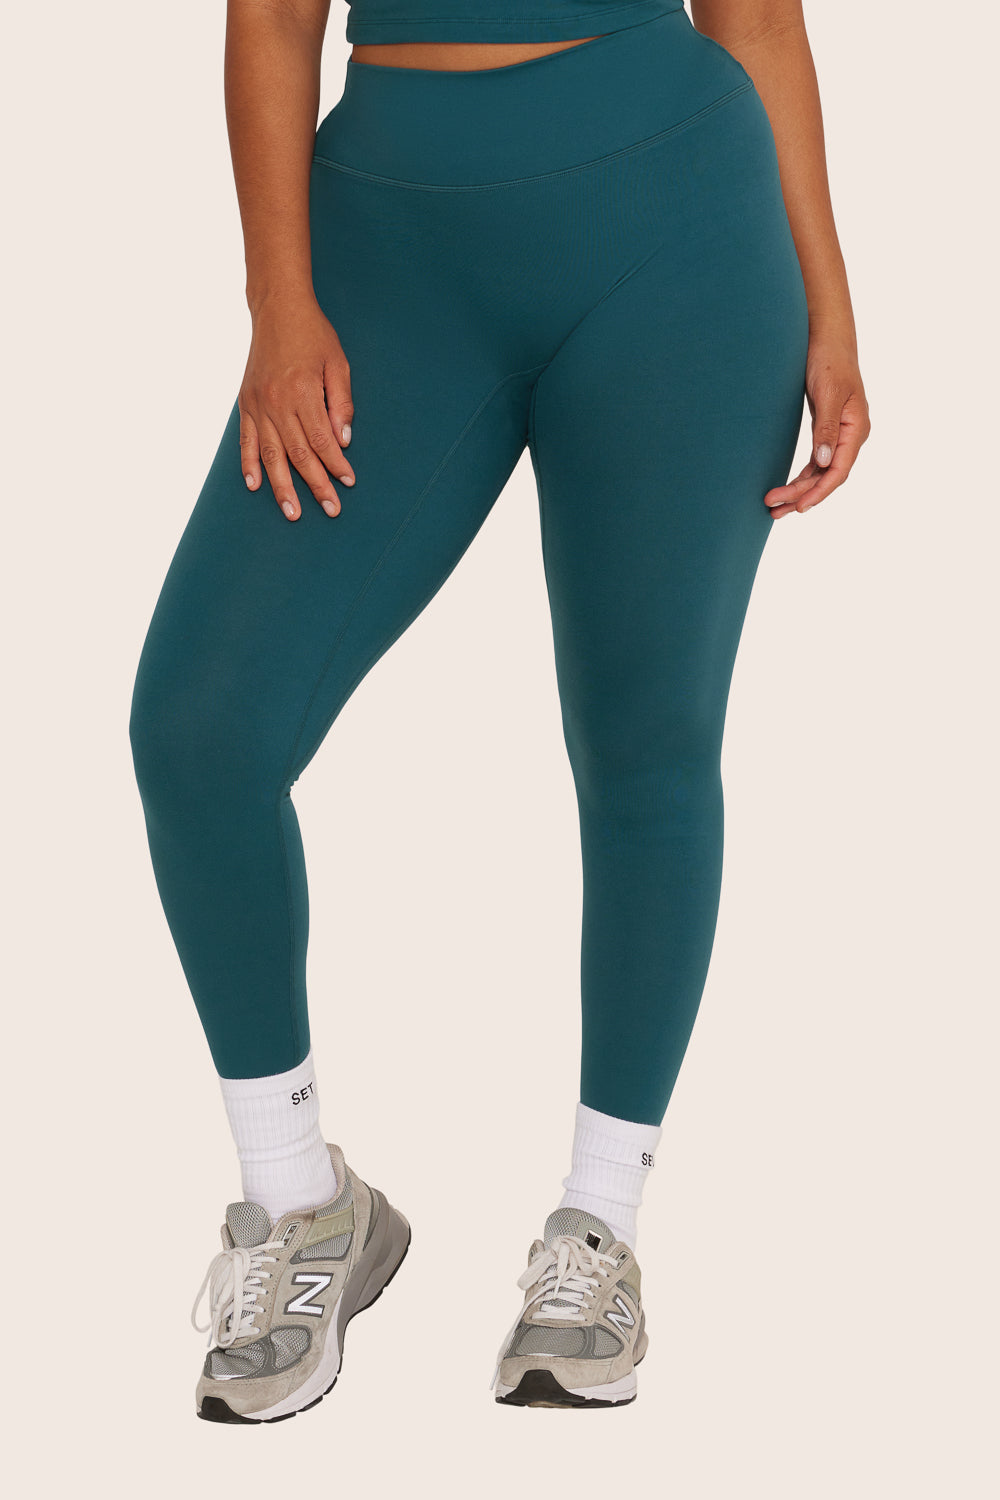 FORMCLOUD® LEGGINGS - AGAVE Featured Image